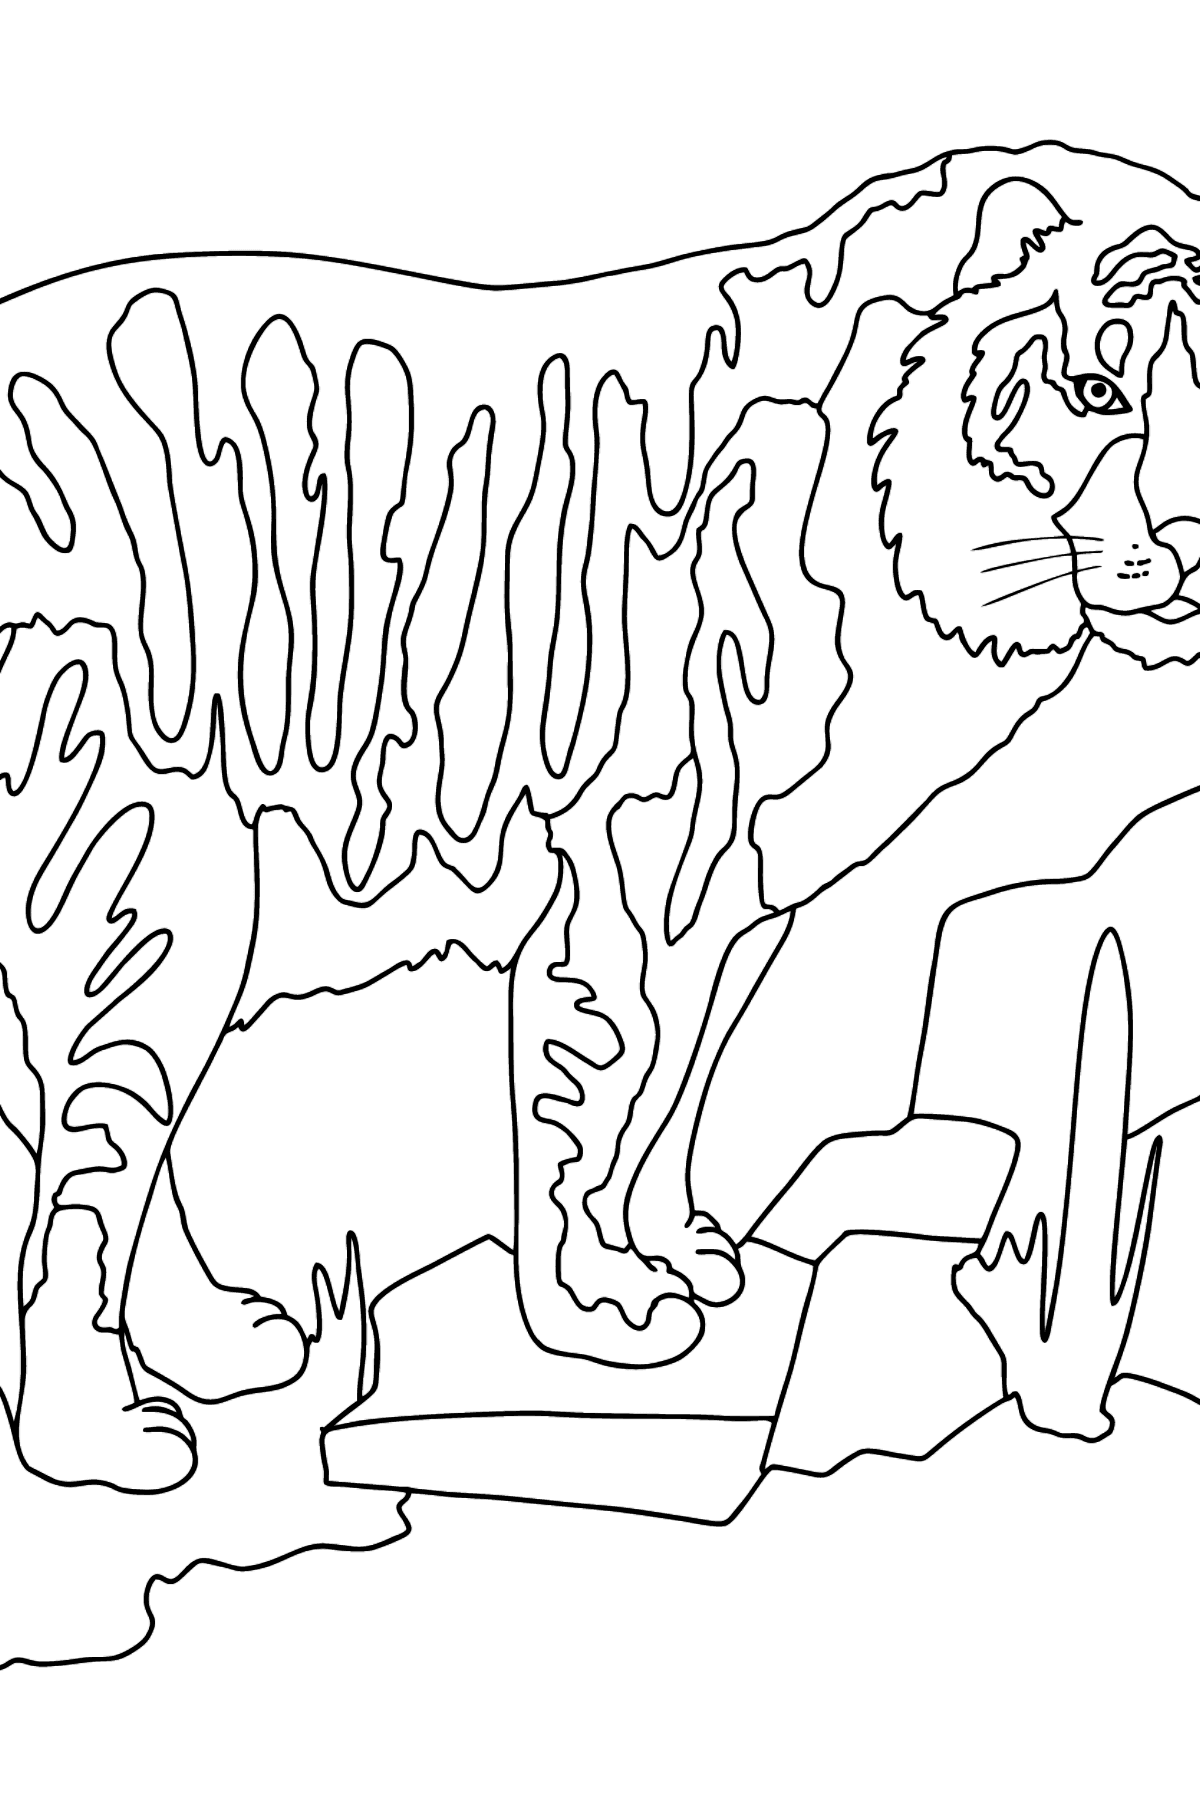 Complex Coloring Page - A Tiger is Looking for Prey - Coloring Pages for Kids